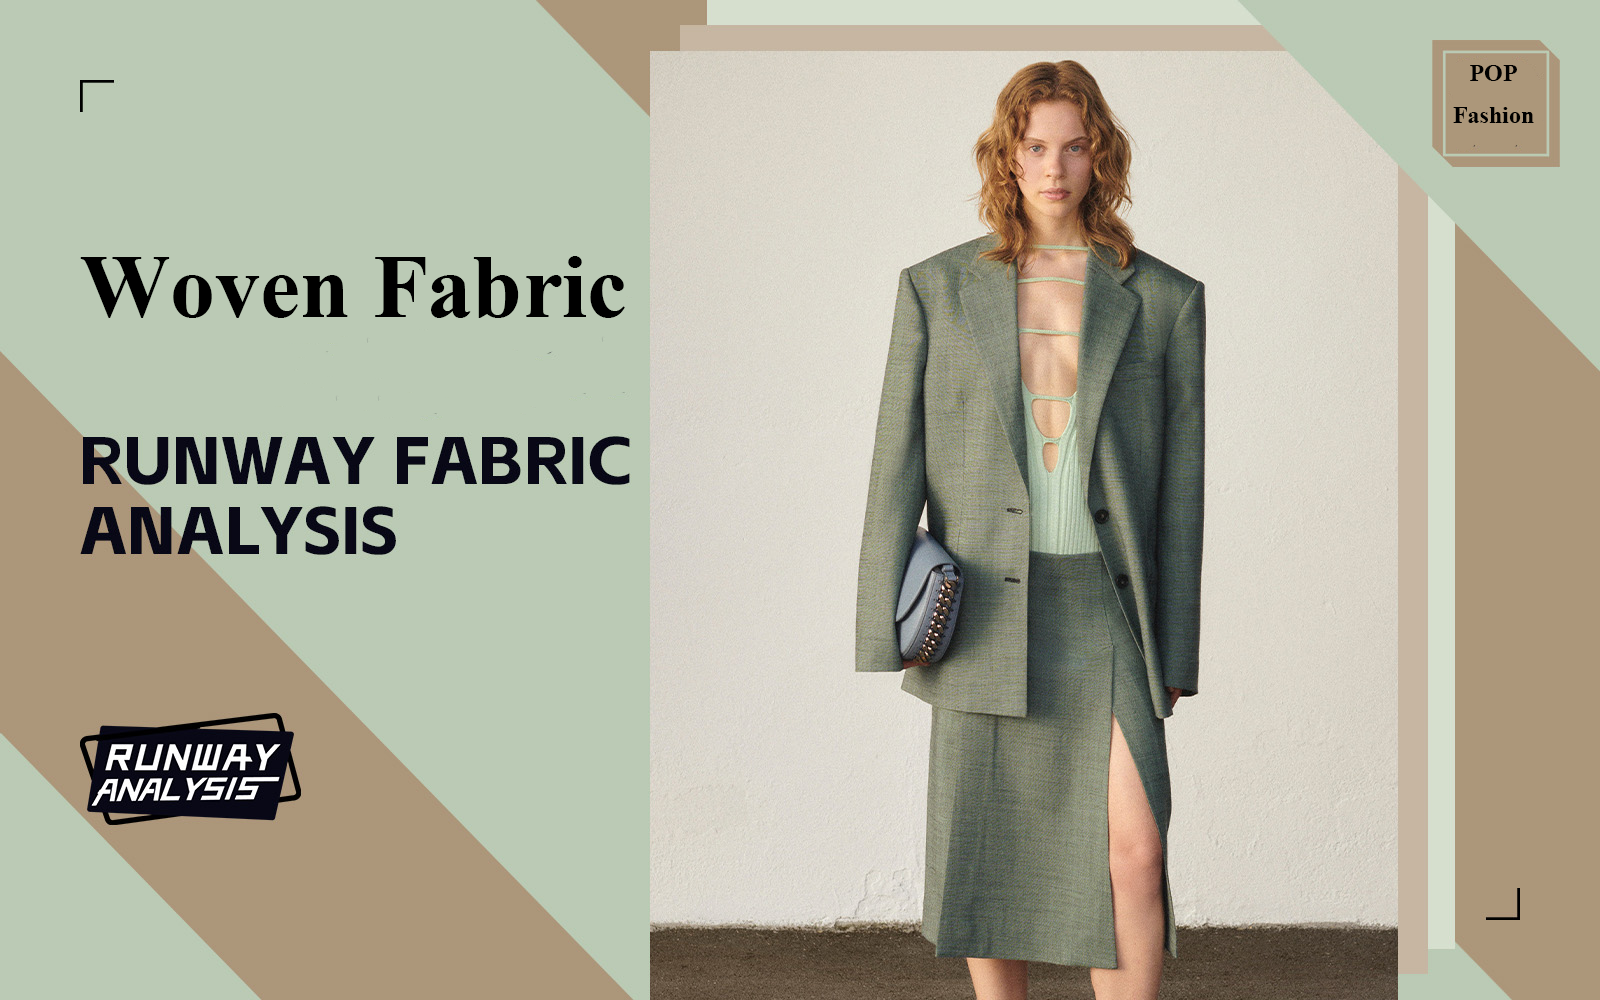 Woven Fabric -- The Comprehensive Analysis of Women's Runway